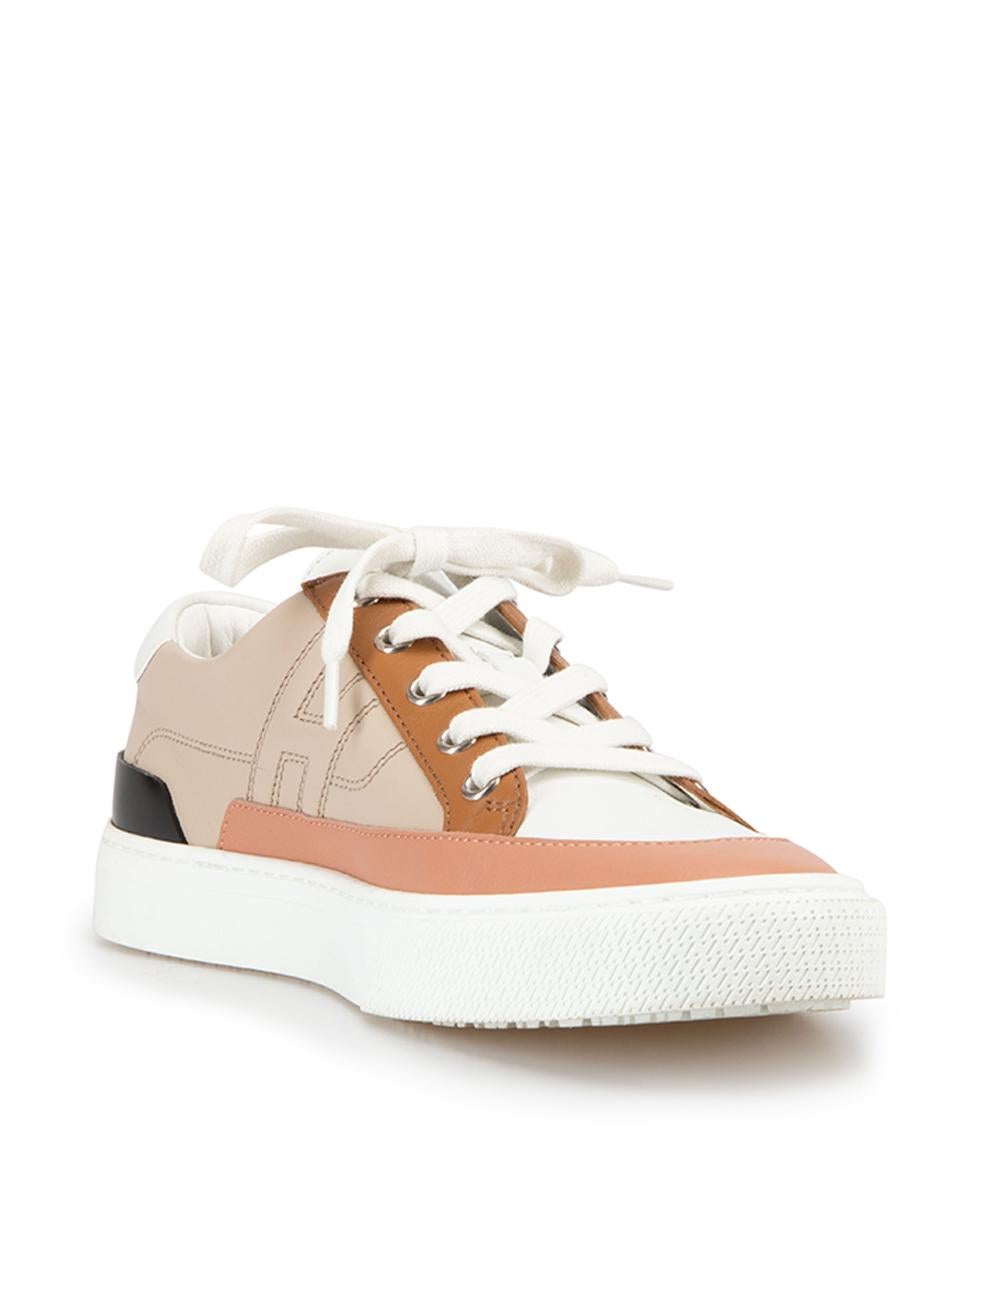 CONDITION is Very good. Minimal wear to trainers is evident on this used Hermès designer resale item. 



Details


Beige, white and nude

Leather

Low top trainers

Lace up

Round toe

Flatform heel

H embroidered detail with colour block